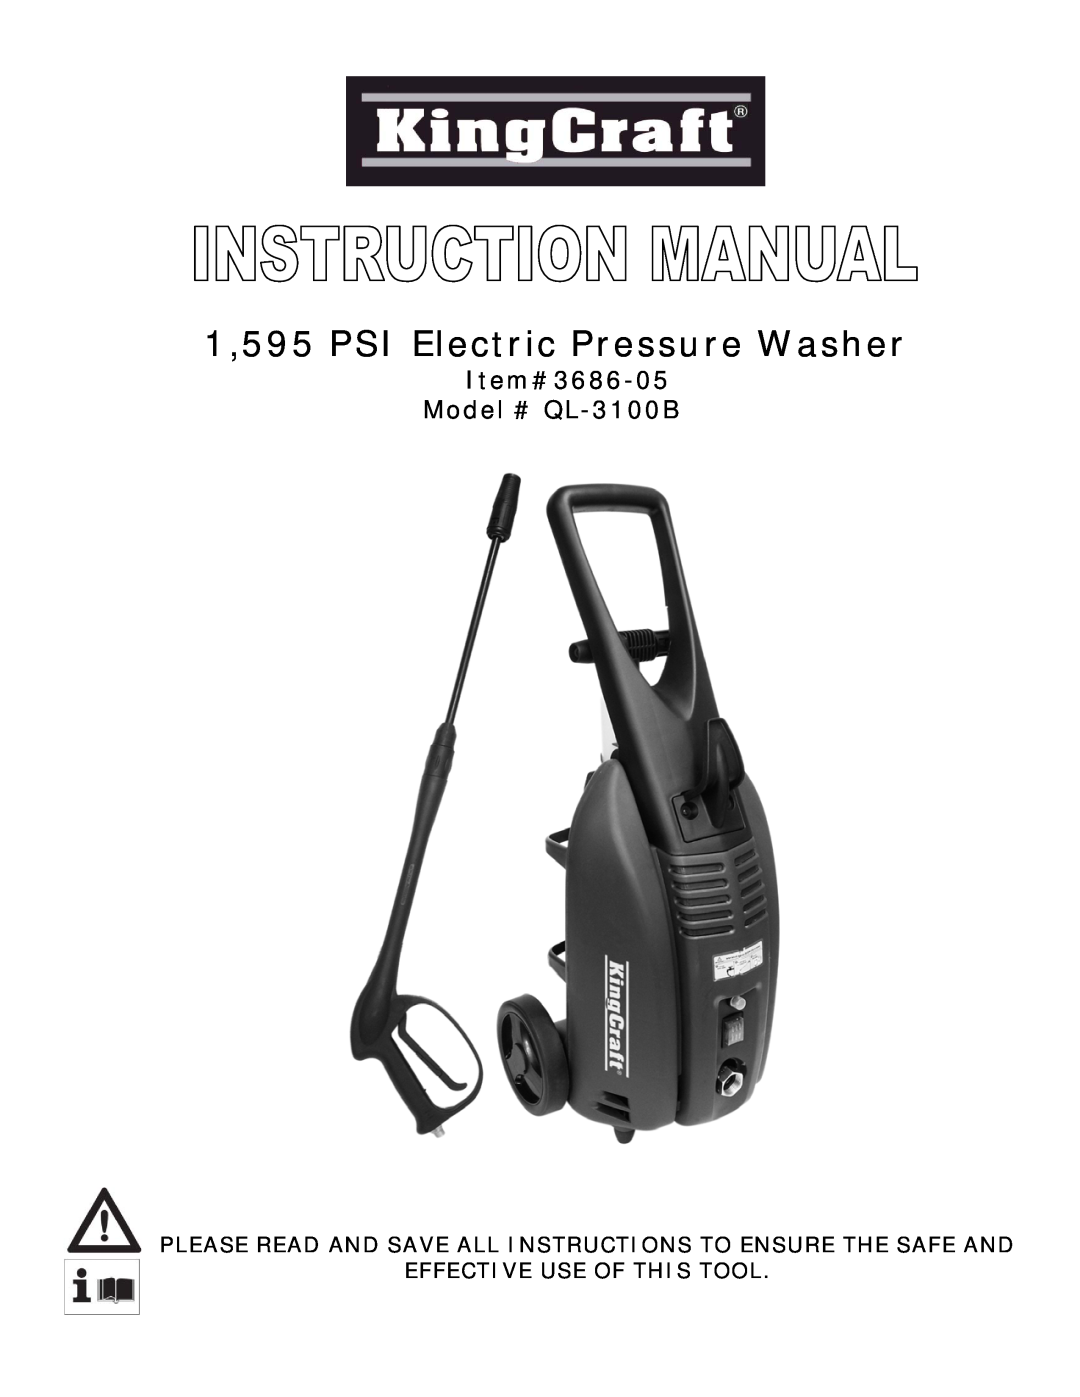 Wachsmuth & Krogmann QL-3100B manual 1,595 PSI Electric Pressure Washer, Effective Use Of This Tool 